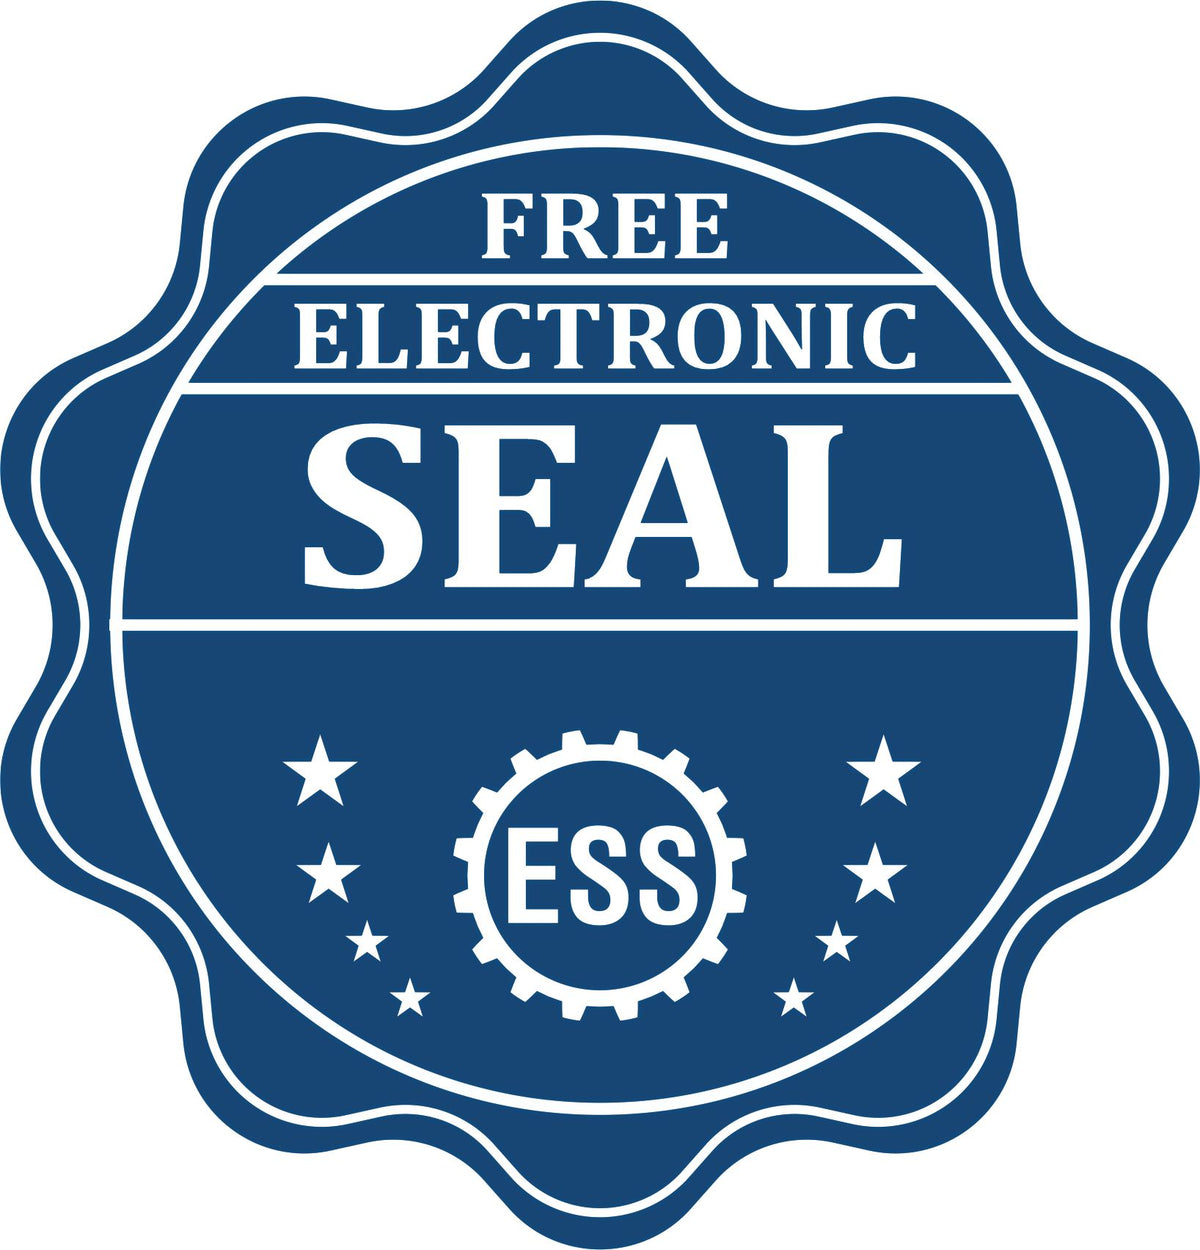 A badge showing a free electronic seal for the Slim Pre-Inked Montana Land Surveyor Seal Stamp with stars and the ESS gear on the emblem.